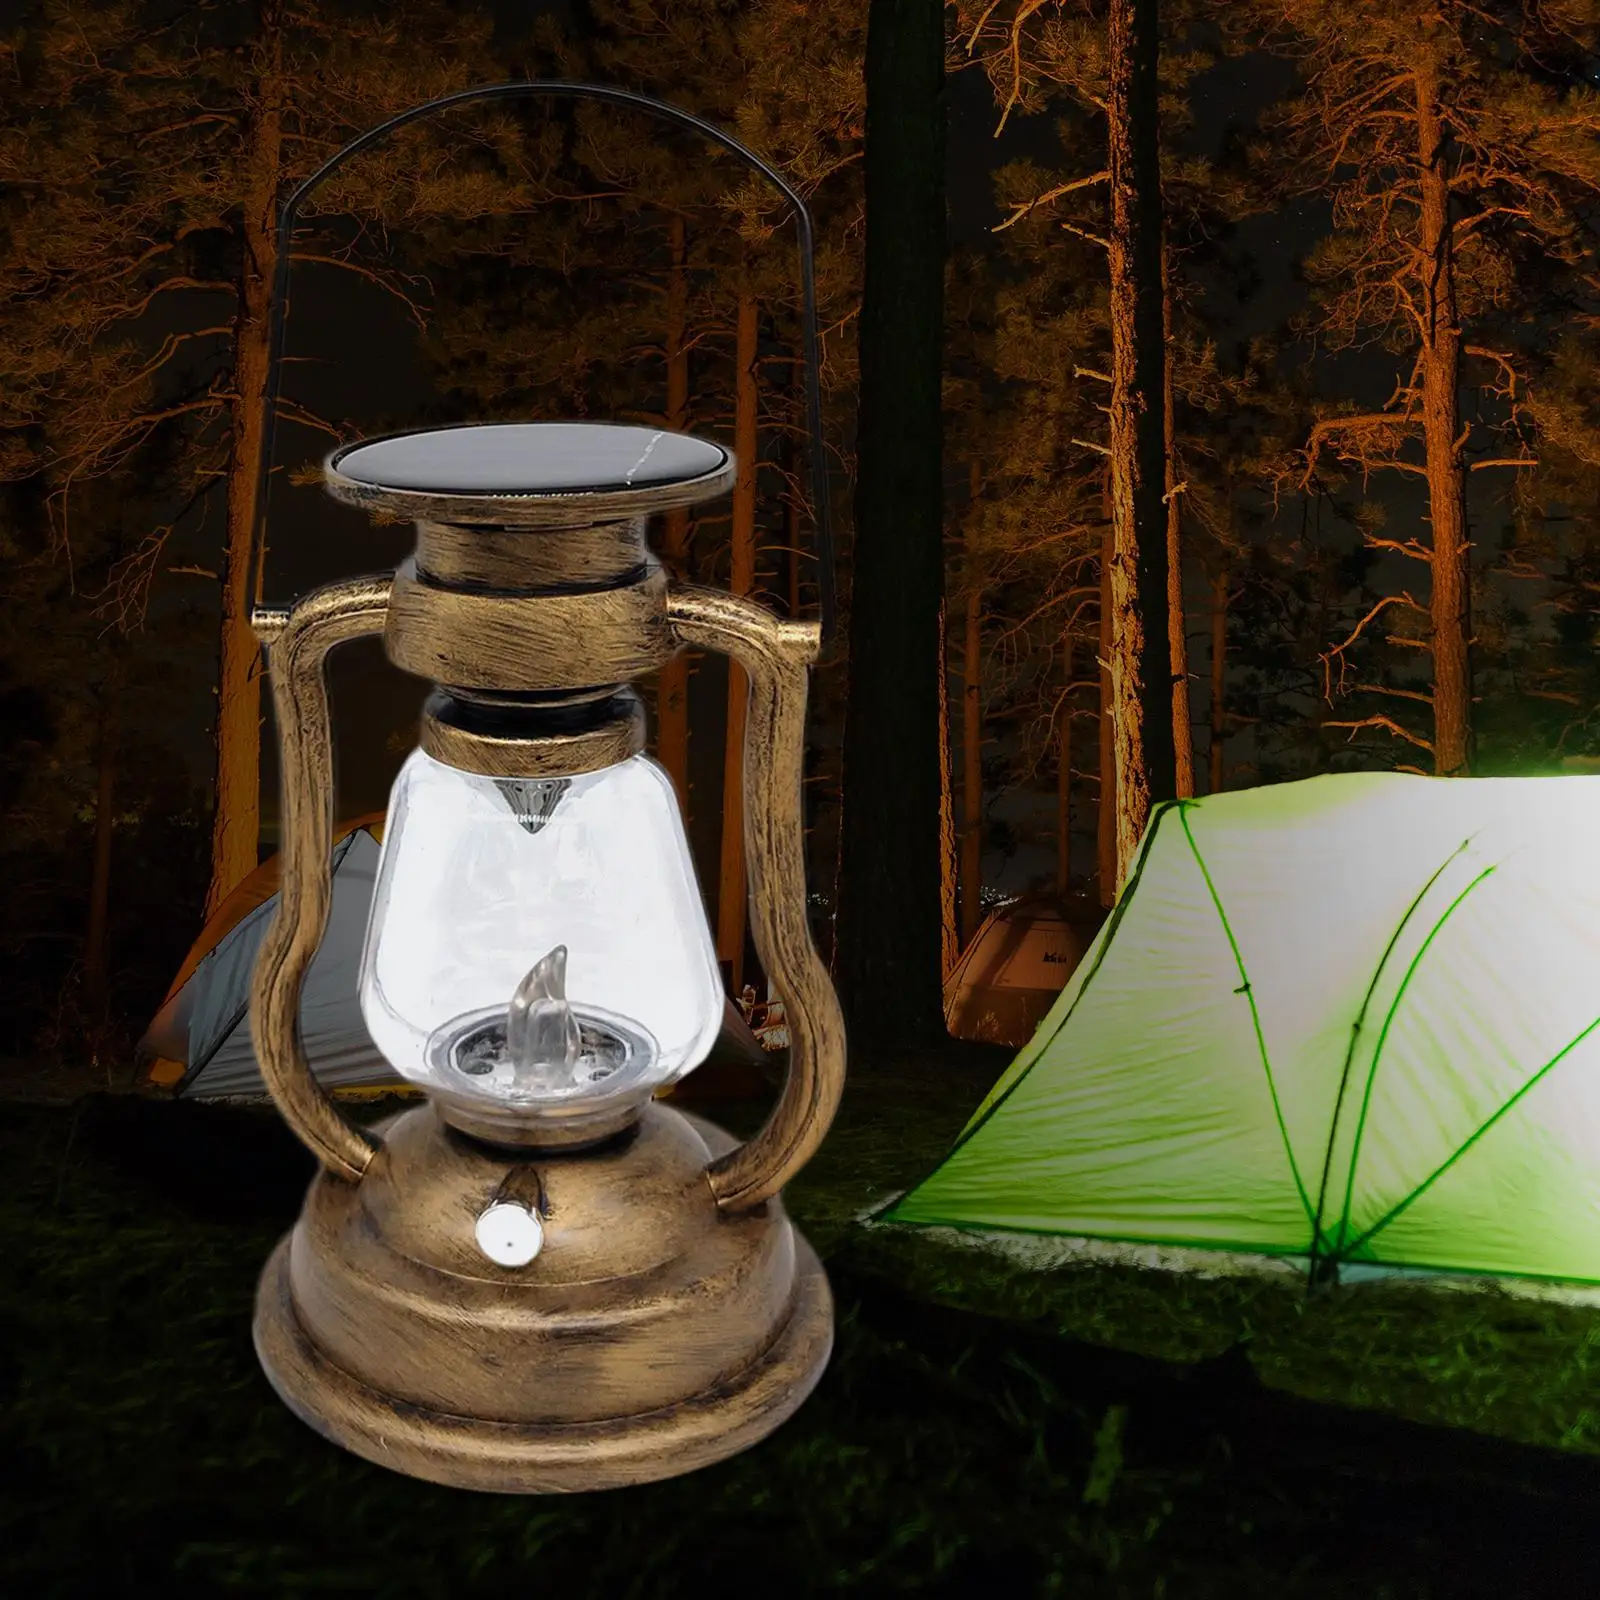 LED Camping Lanterns Solar Waterproof Night Light Handheld or Hanging Outdoors Retro Style Camping Lamp for Fence Pathway Decor